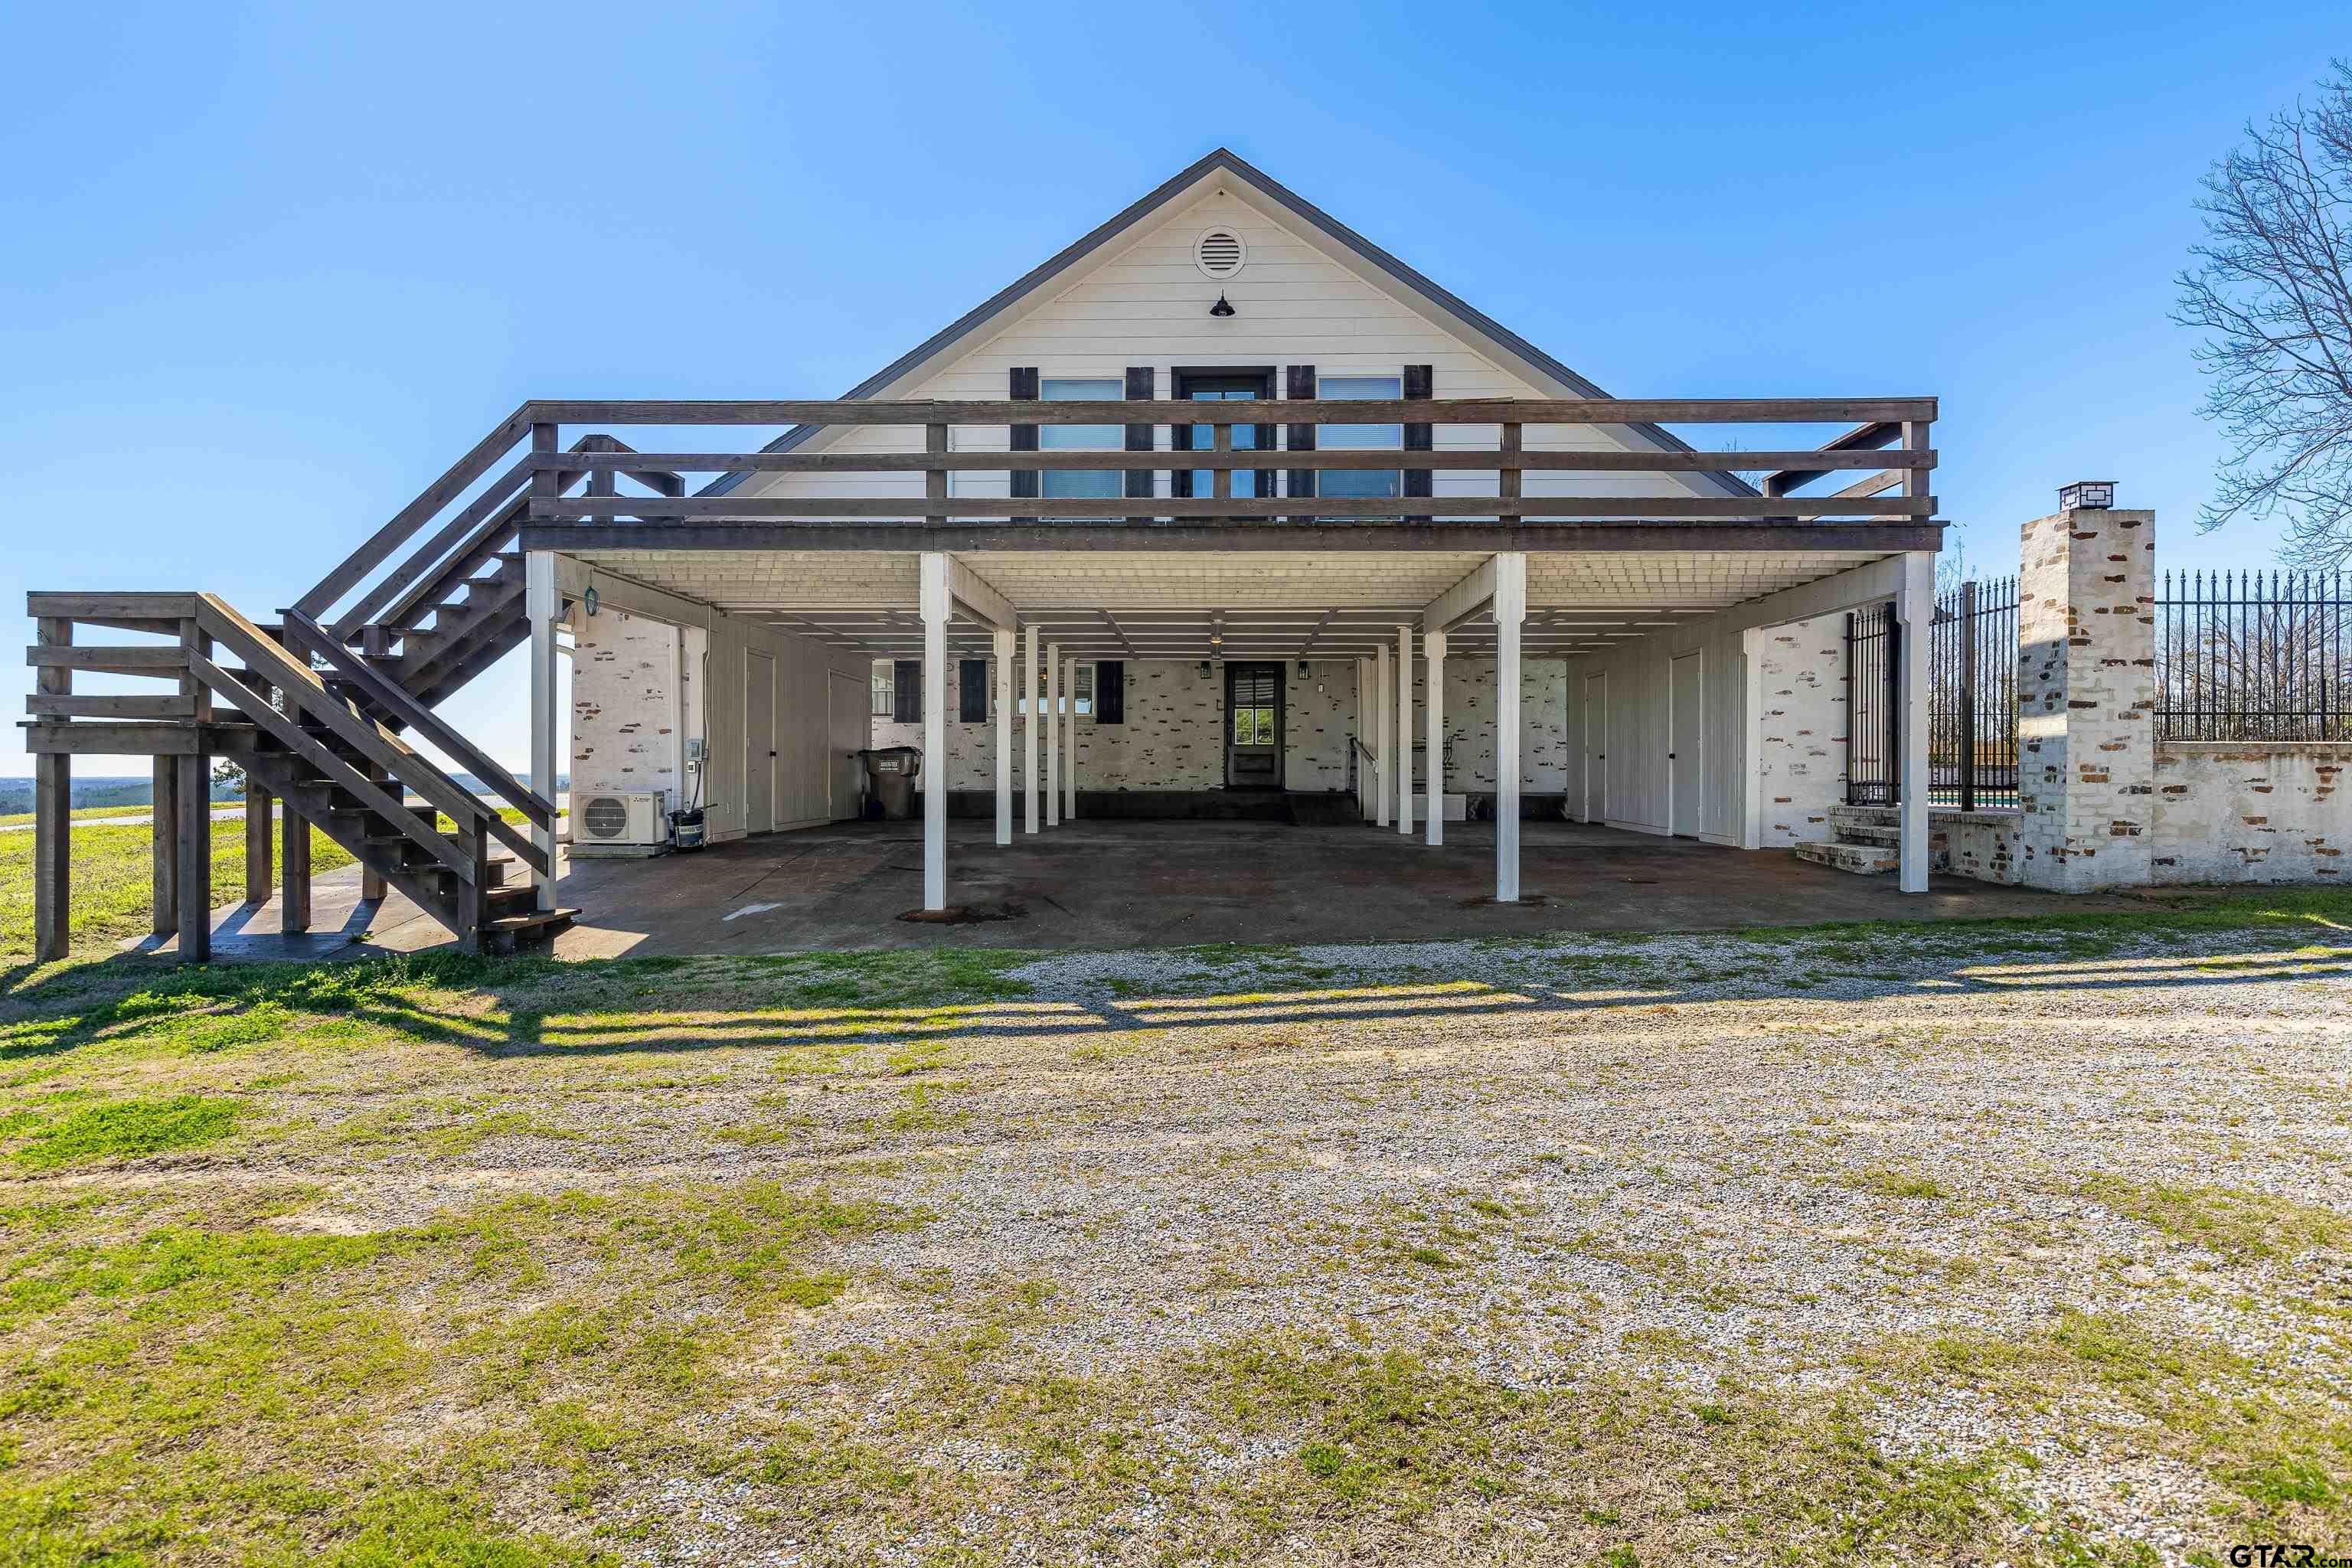 245 County Road 3914, Bullard, Texas, 75757, United States, 7 Bedrooms Bedrooms, ,5 BathroomsBathrooms,Residential,For Sale,245 County Road 3914,1474440